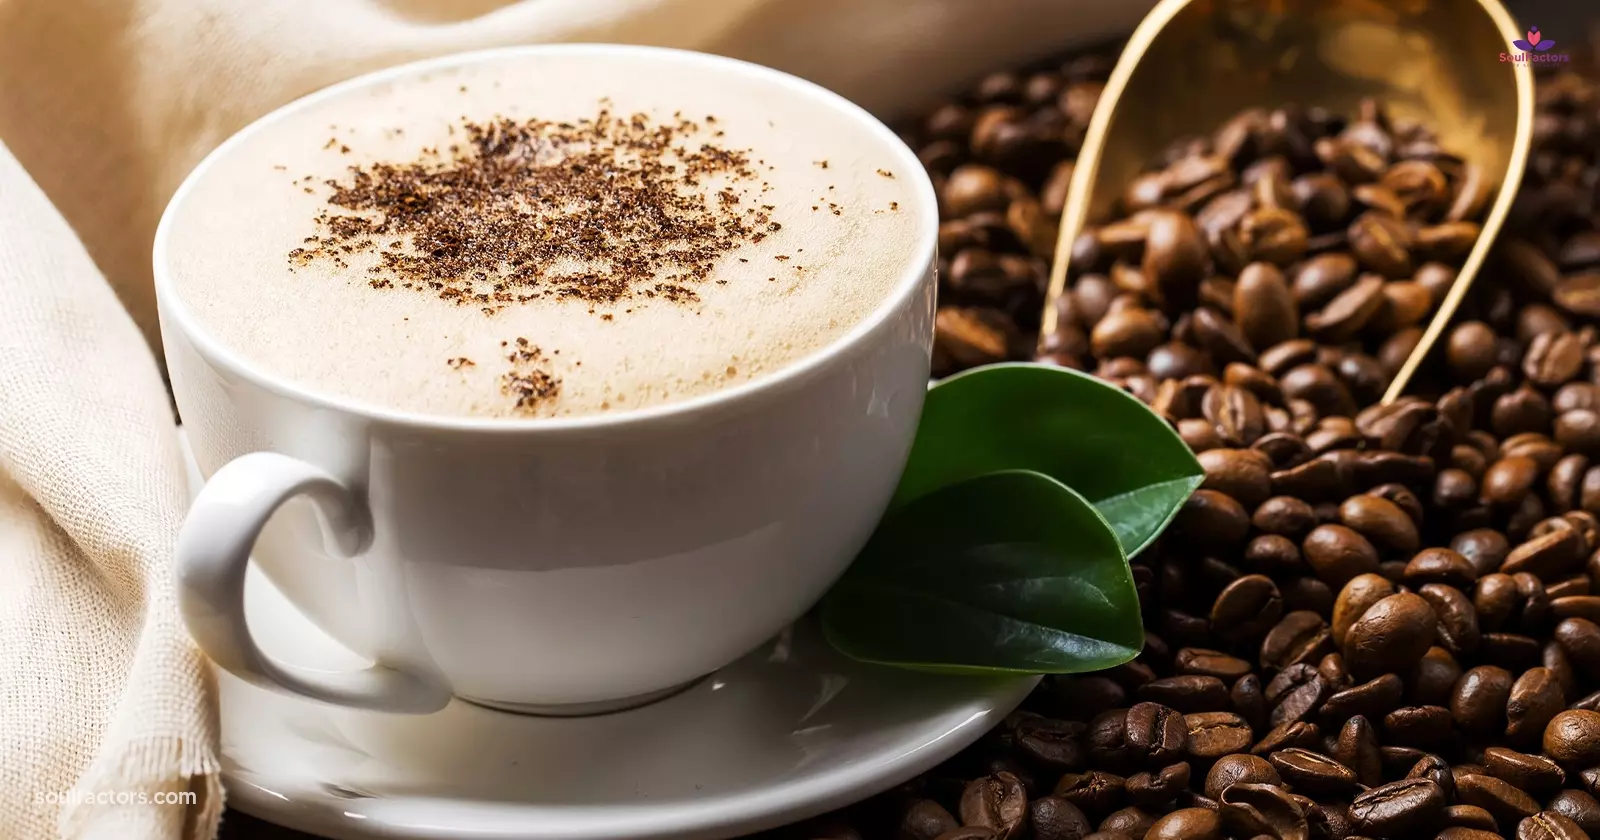 Coffee Consumption Could Reduce Risk of Gestational Diabetes